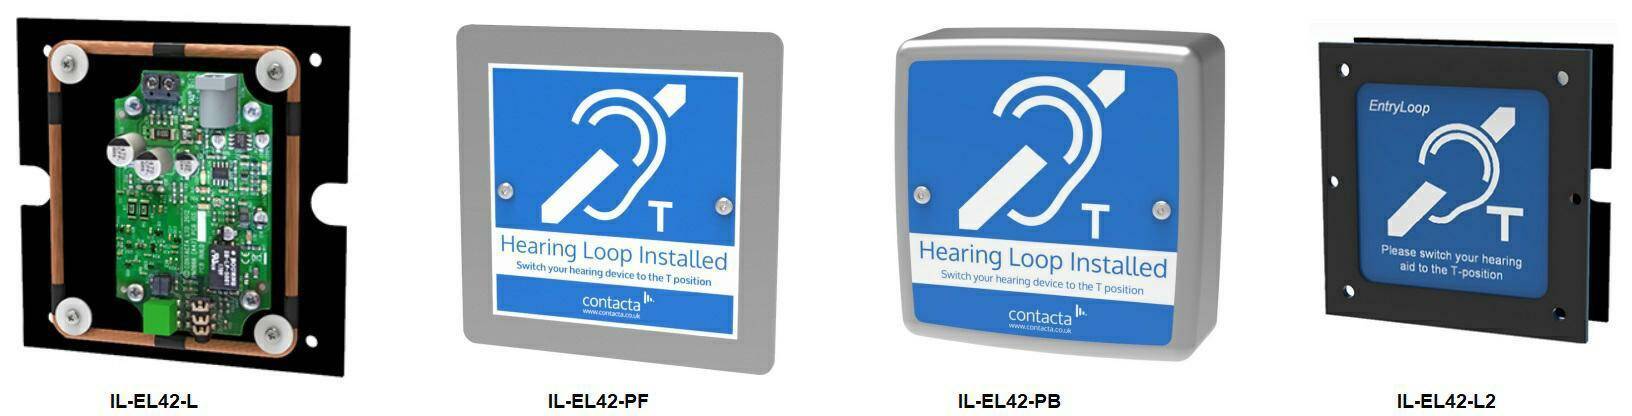 Induction loop in infokiosks - improving accessibility in hotels and conference centres